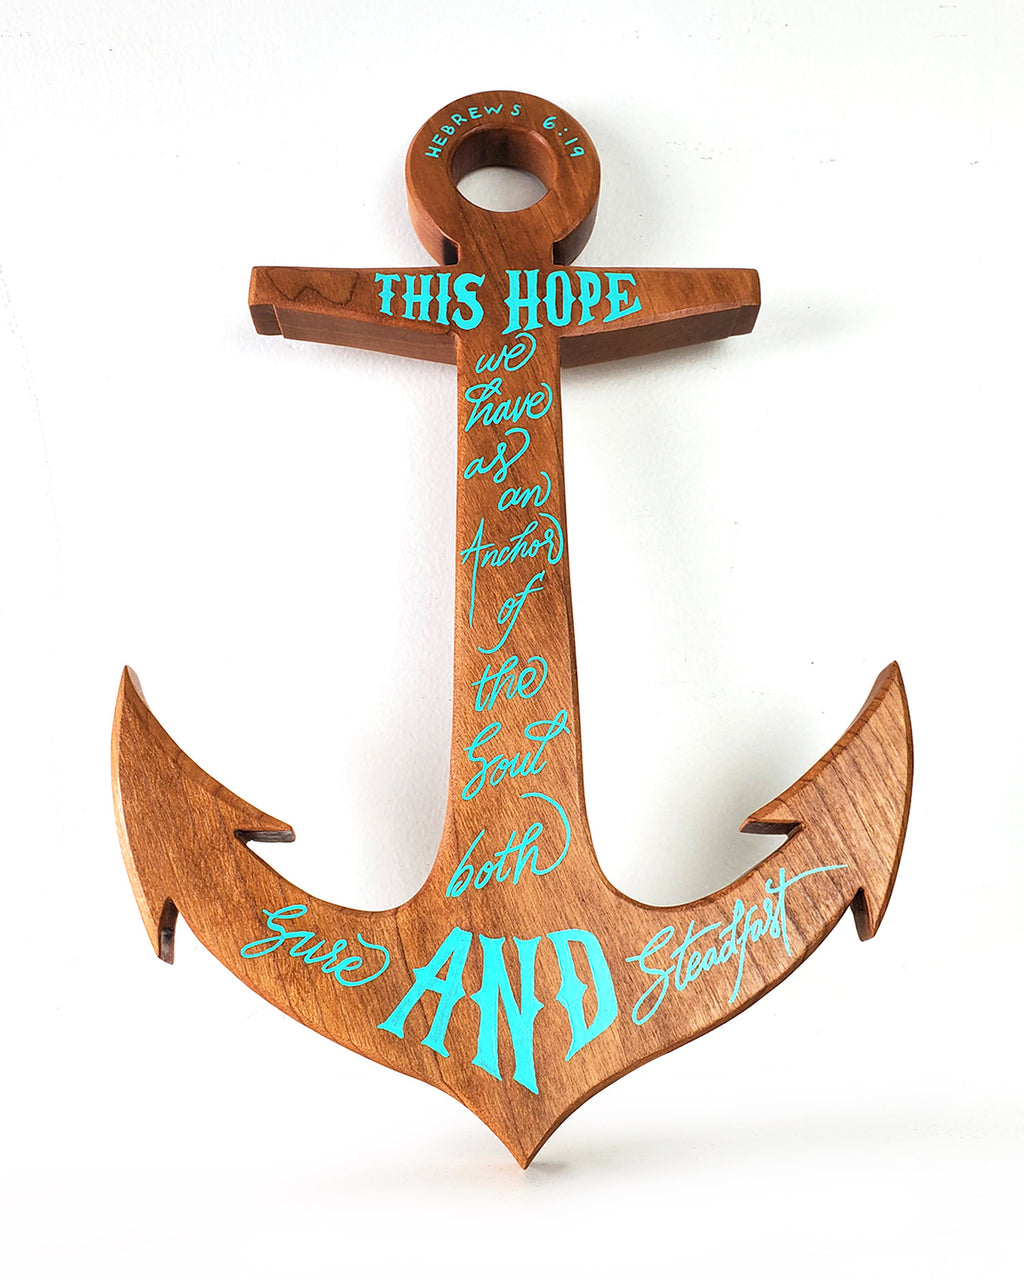 Anchor of Hope